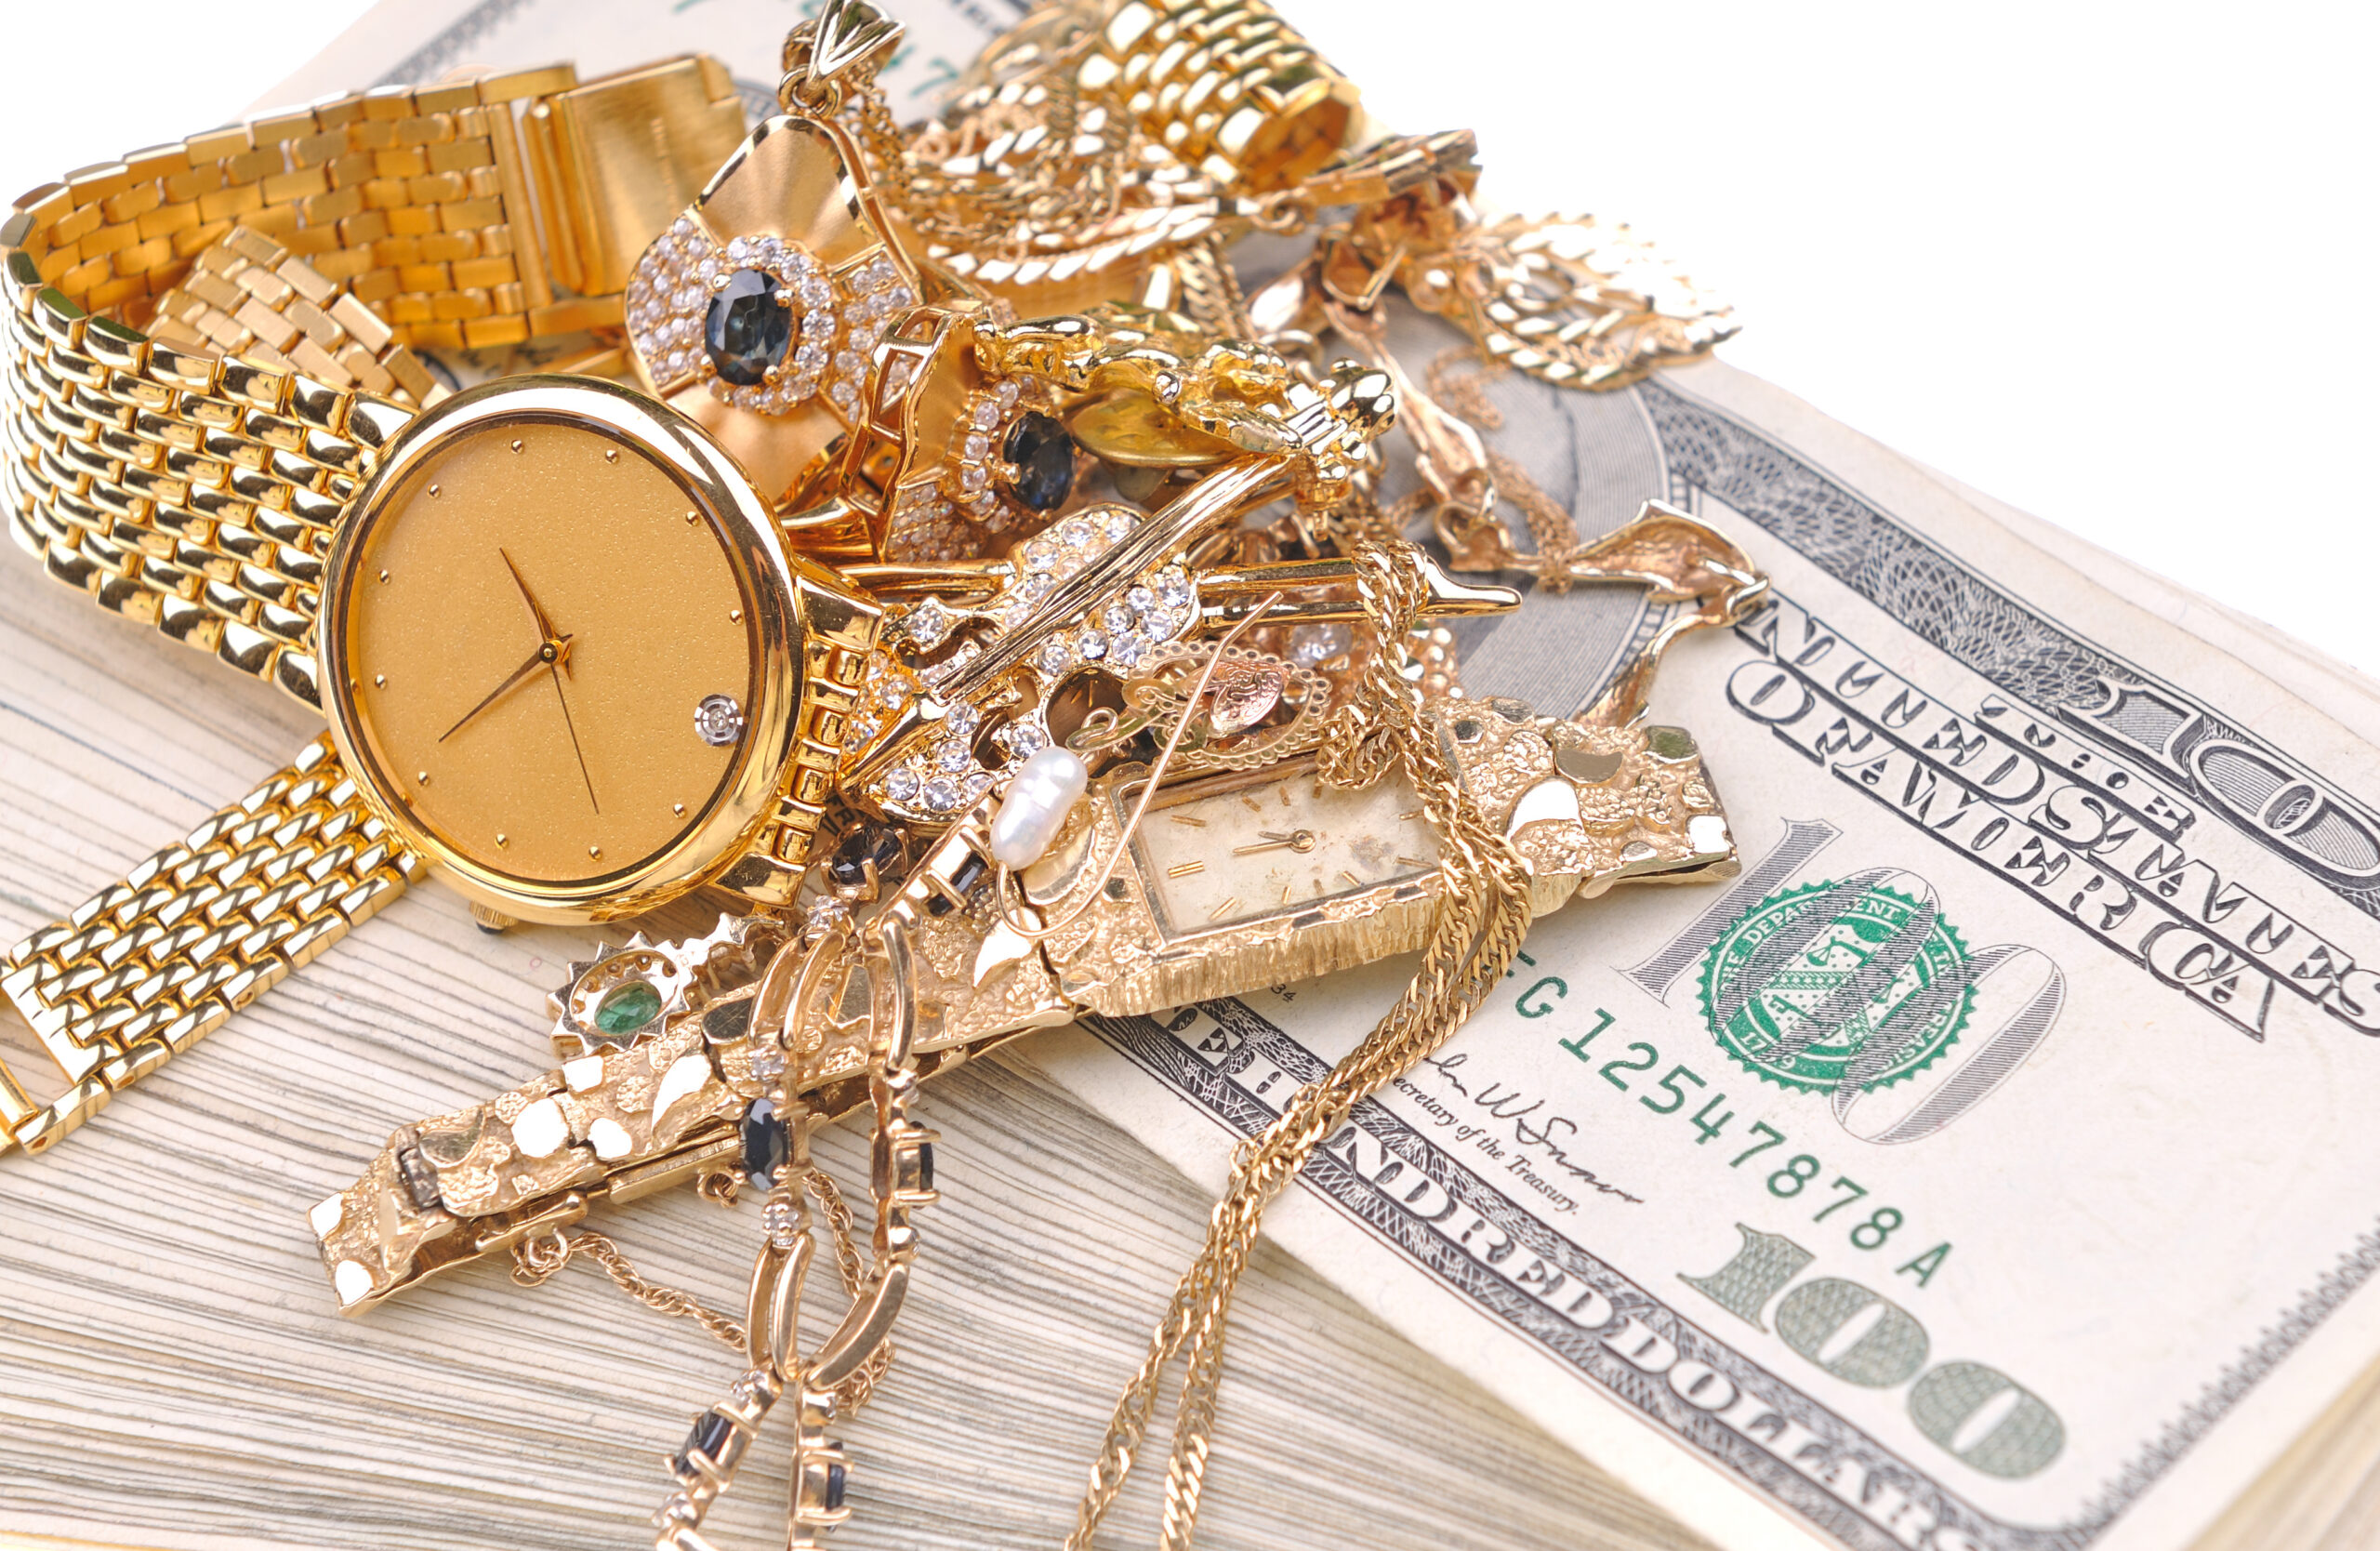 god and diamond watches/valuables on a stack of 100 dollar bills